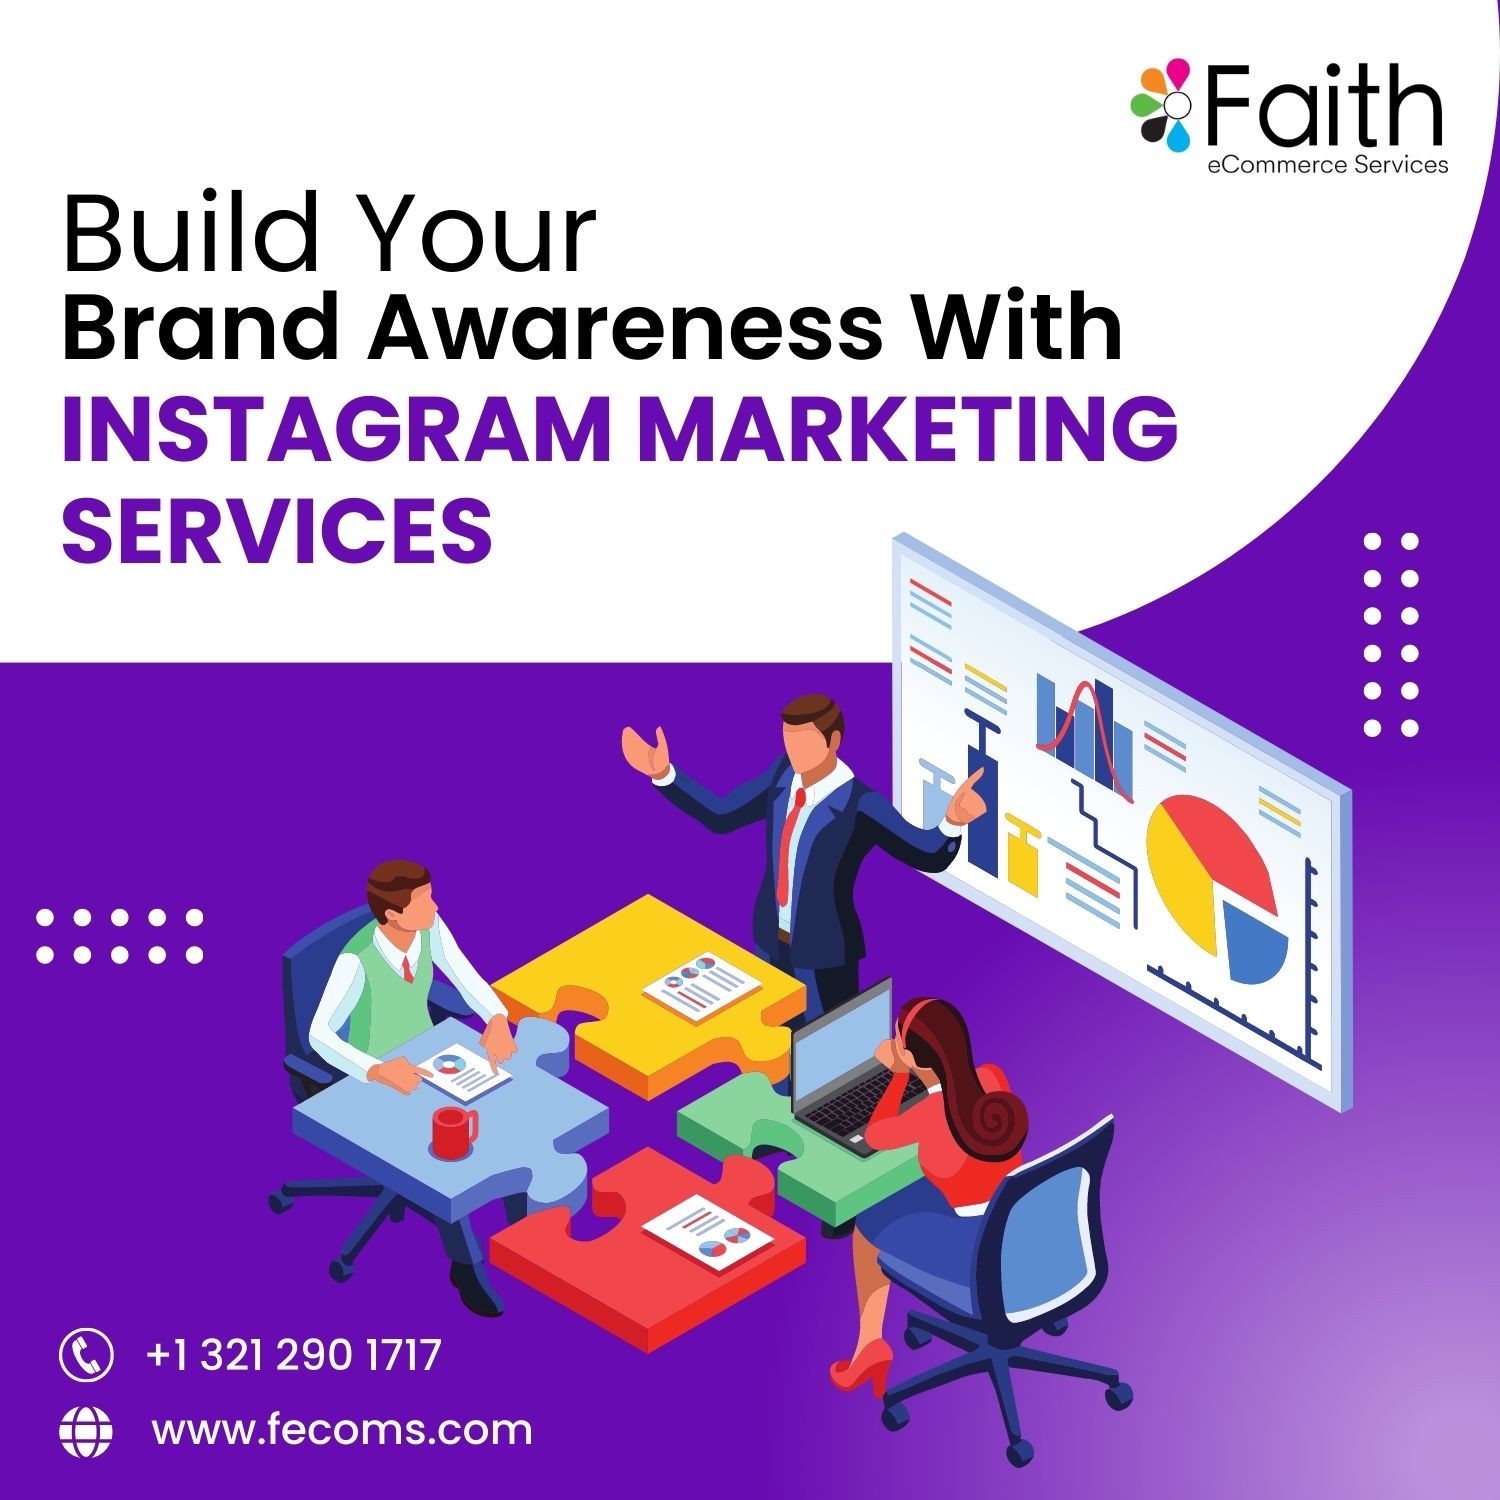 Build Your Brand Awareness with Instagram Marketing Services